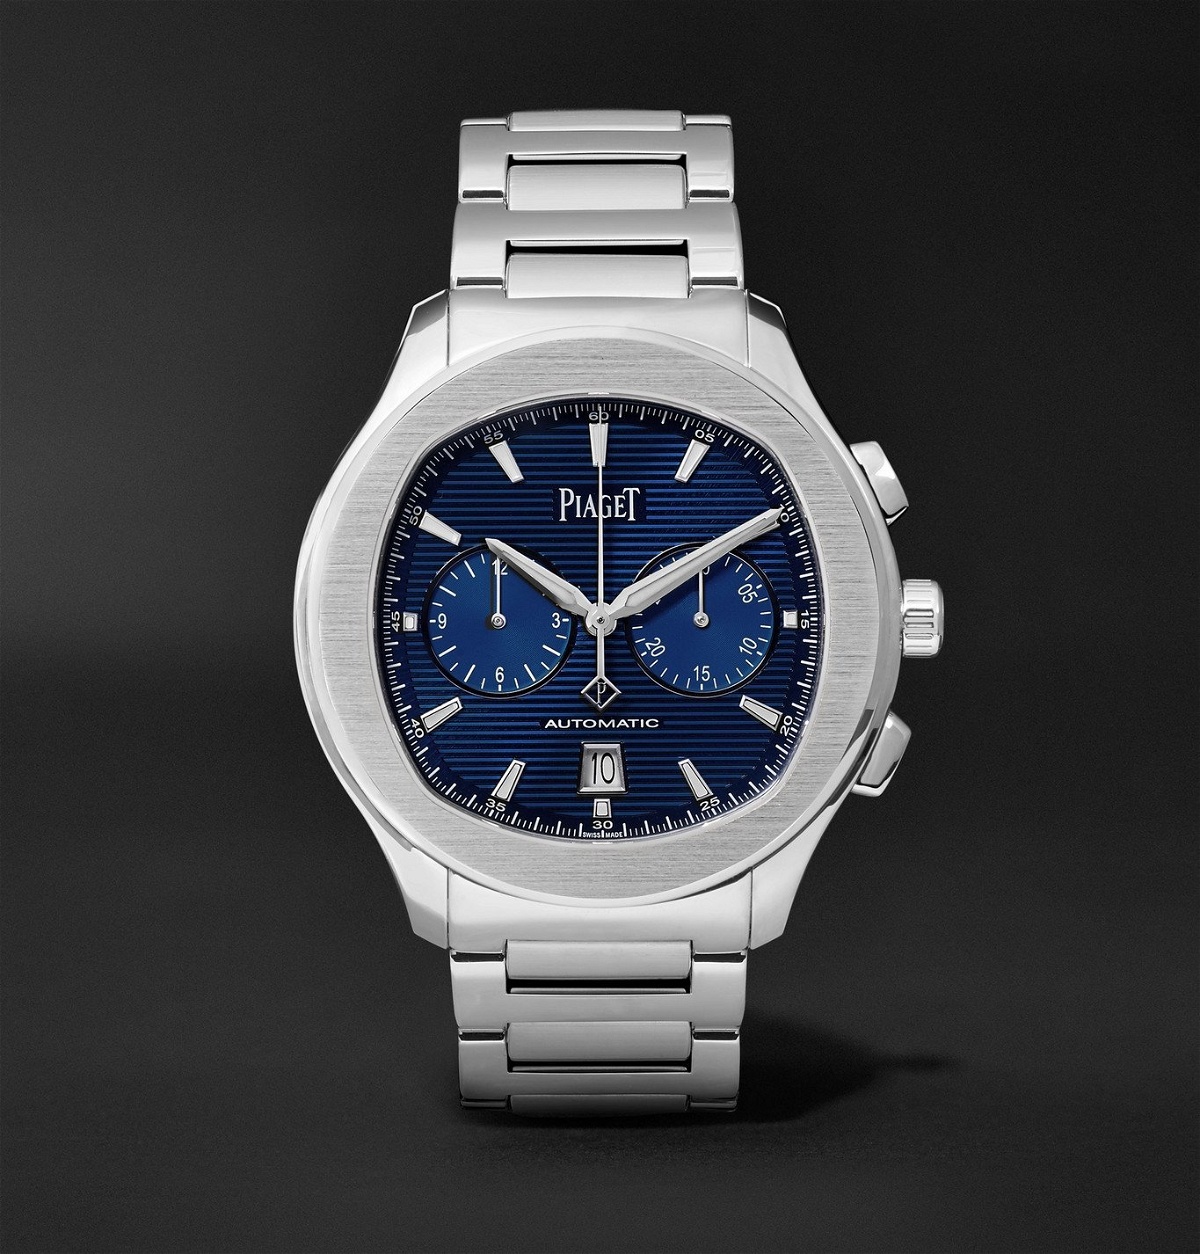 Photo: Piaget - Polo S Automatic Chronograph 42mm Stainless Steel Watch, Ref. No. G0A41006 - Blue